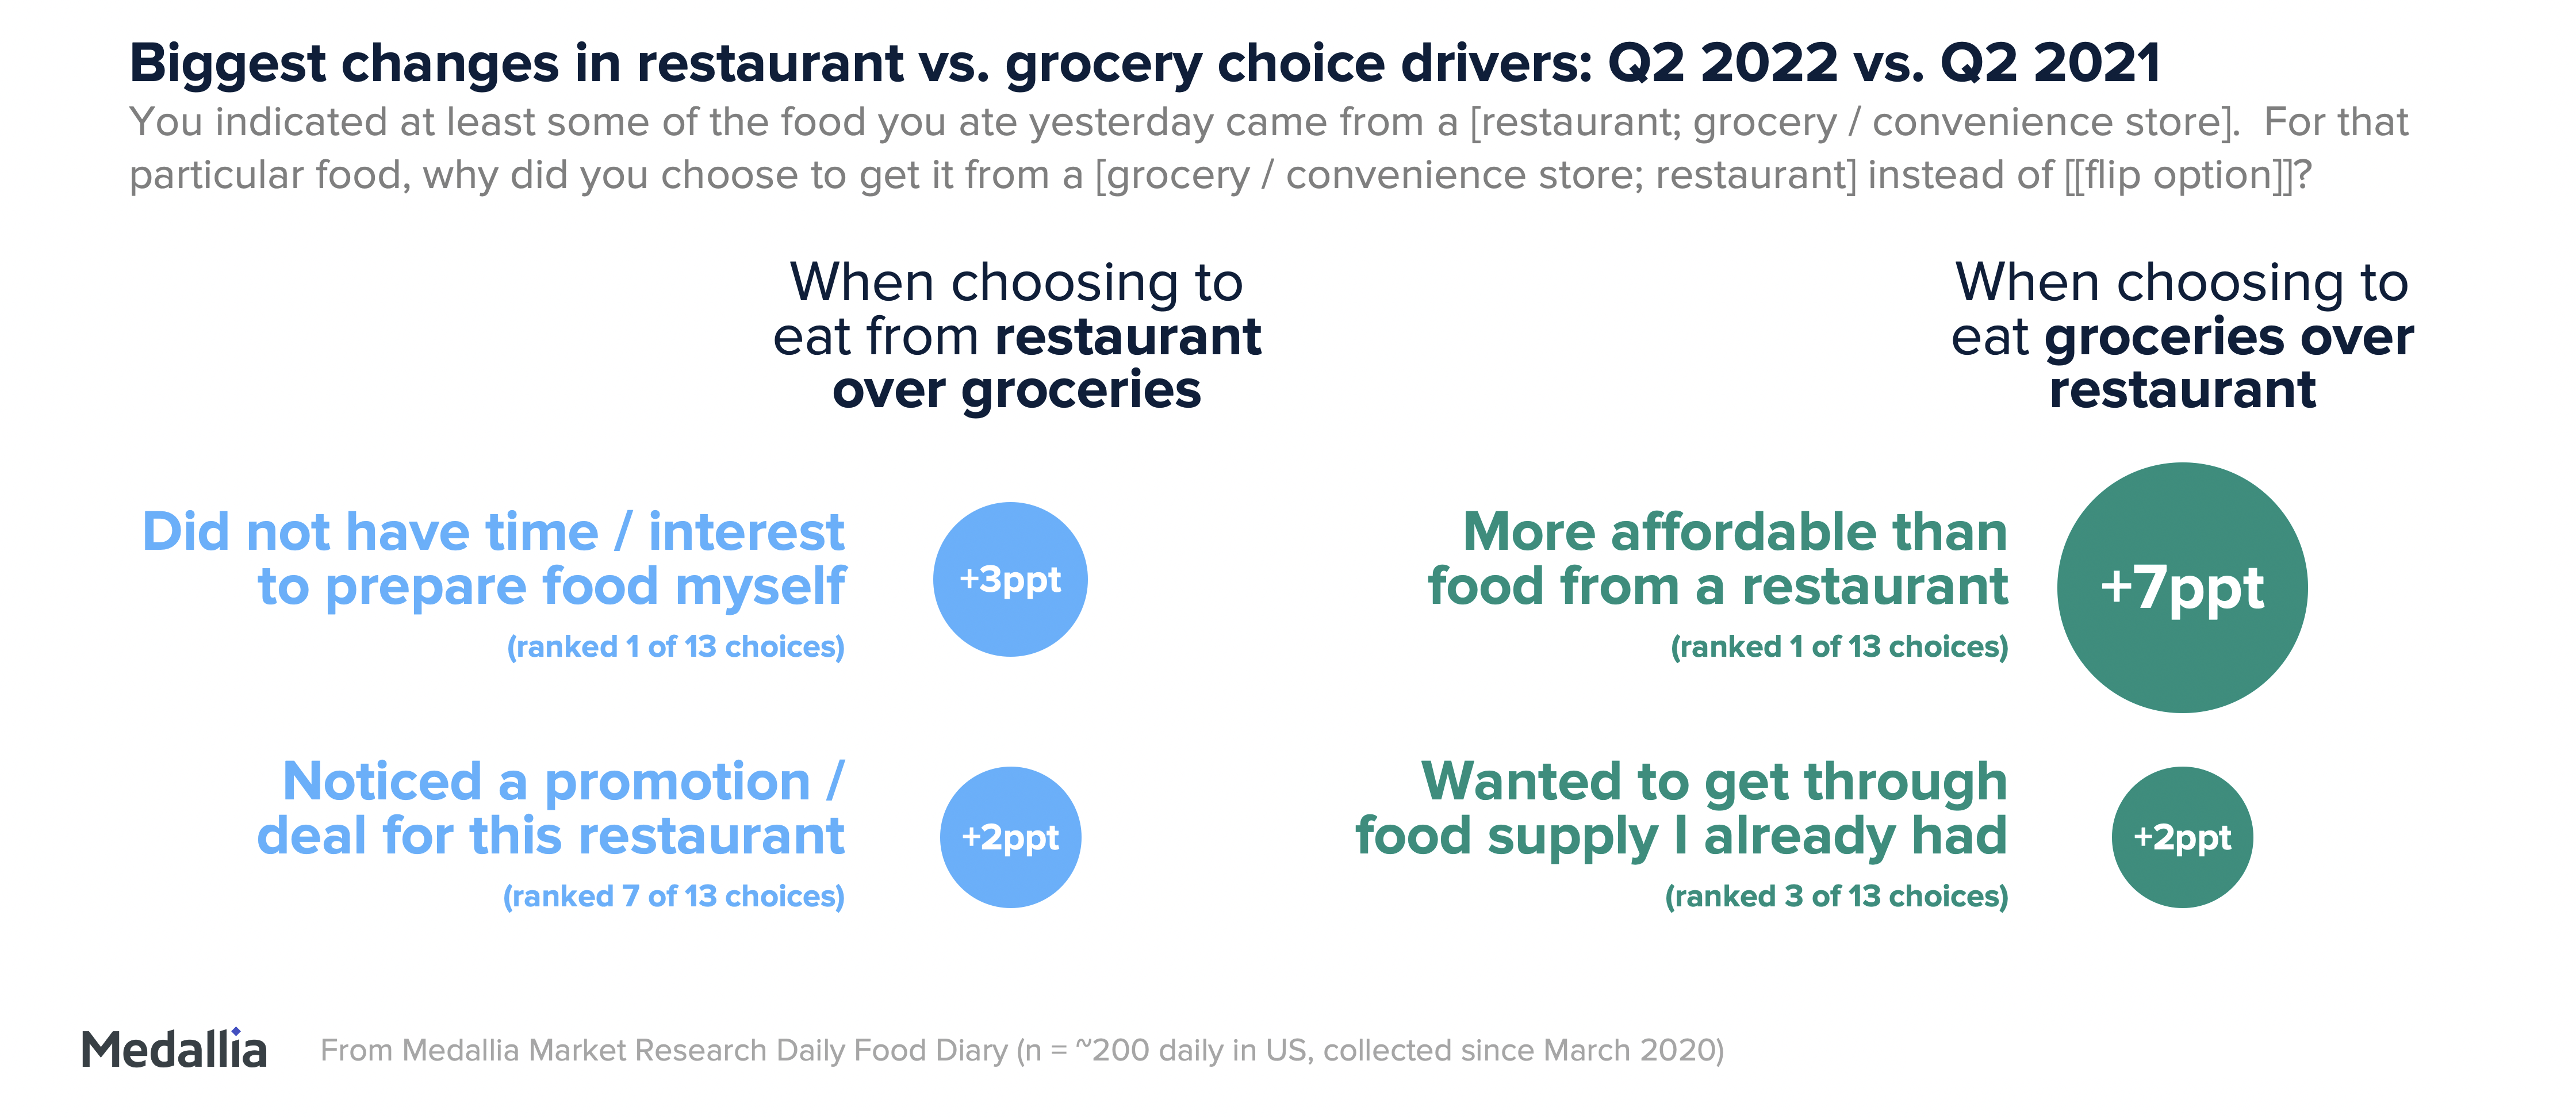 Biggest changes in restaurant vs grocery choice drivers. Notably there is a positive 7ppt change in “more affordable than food from a restaurant.”